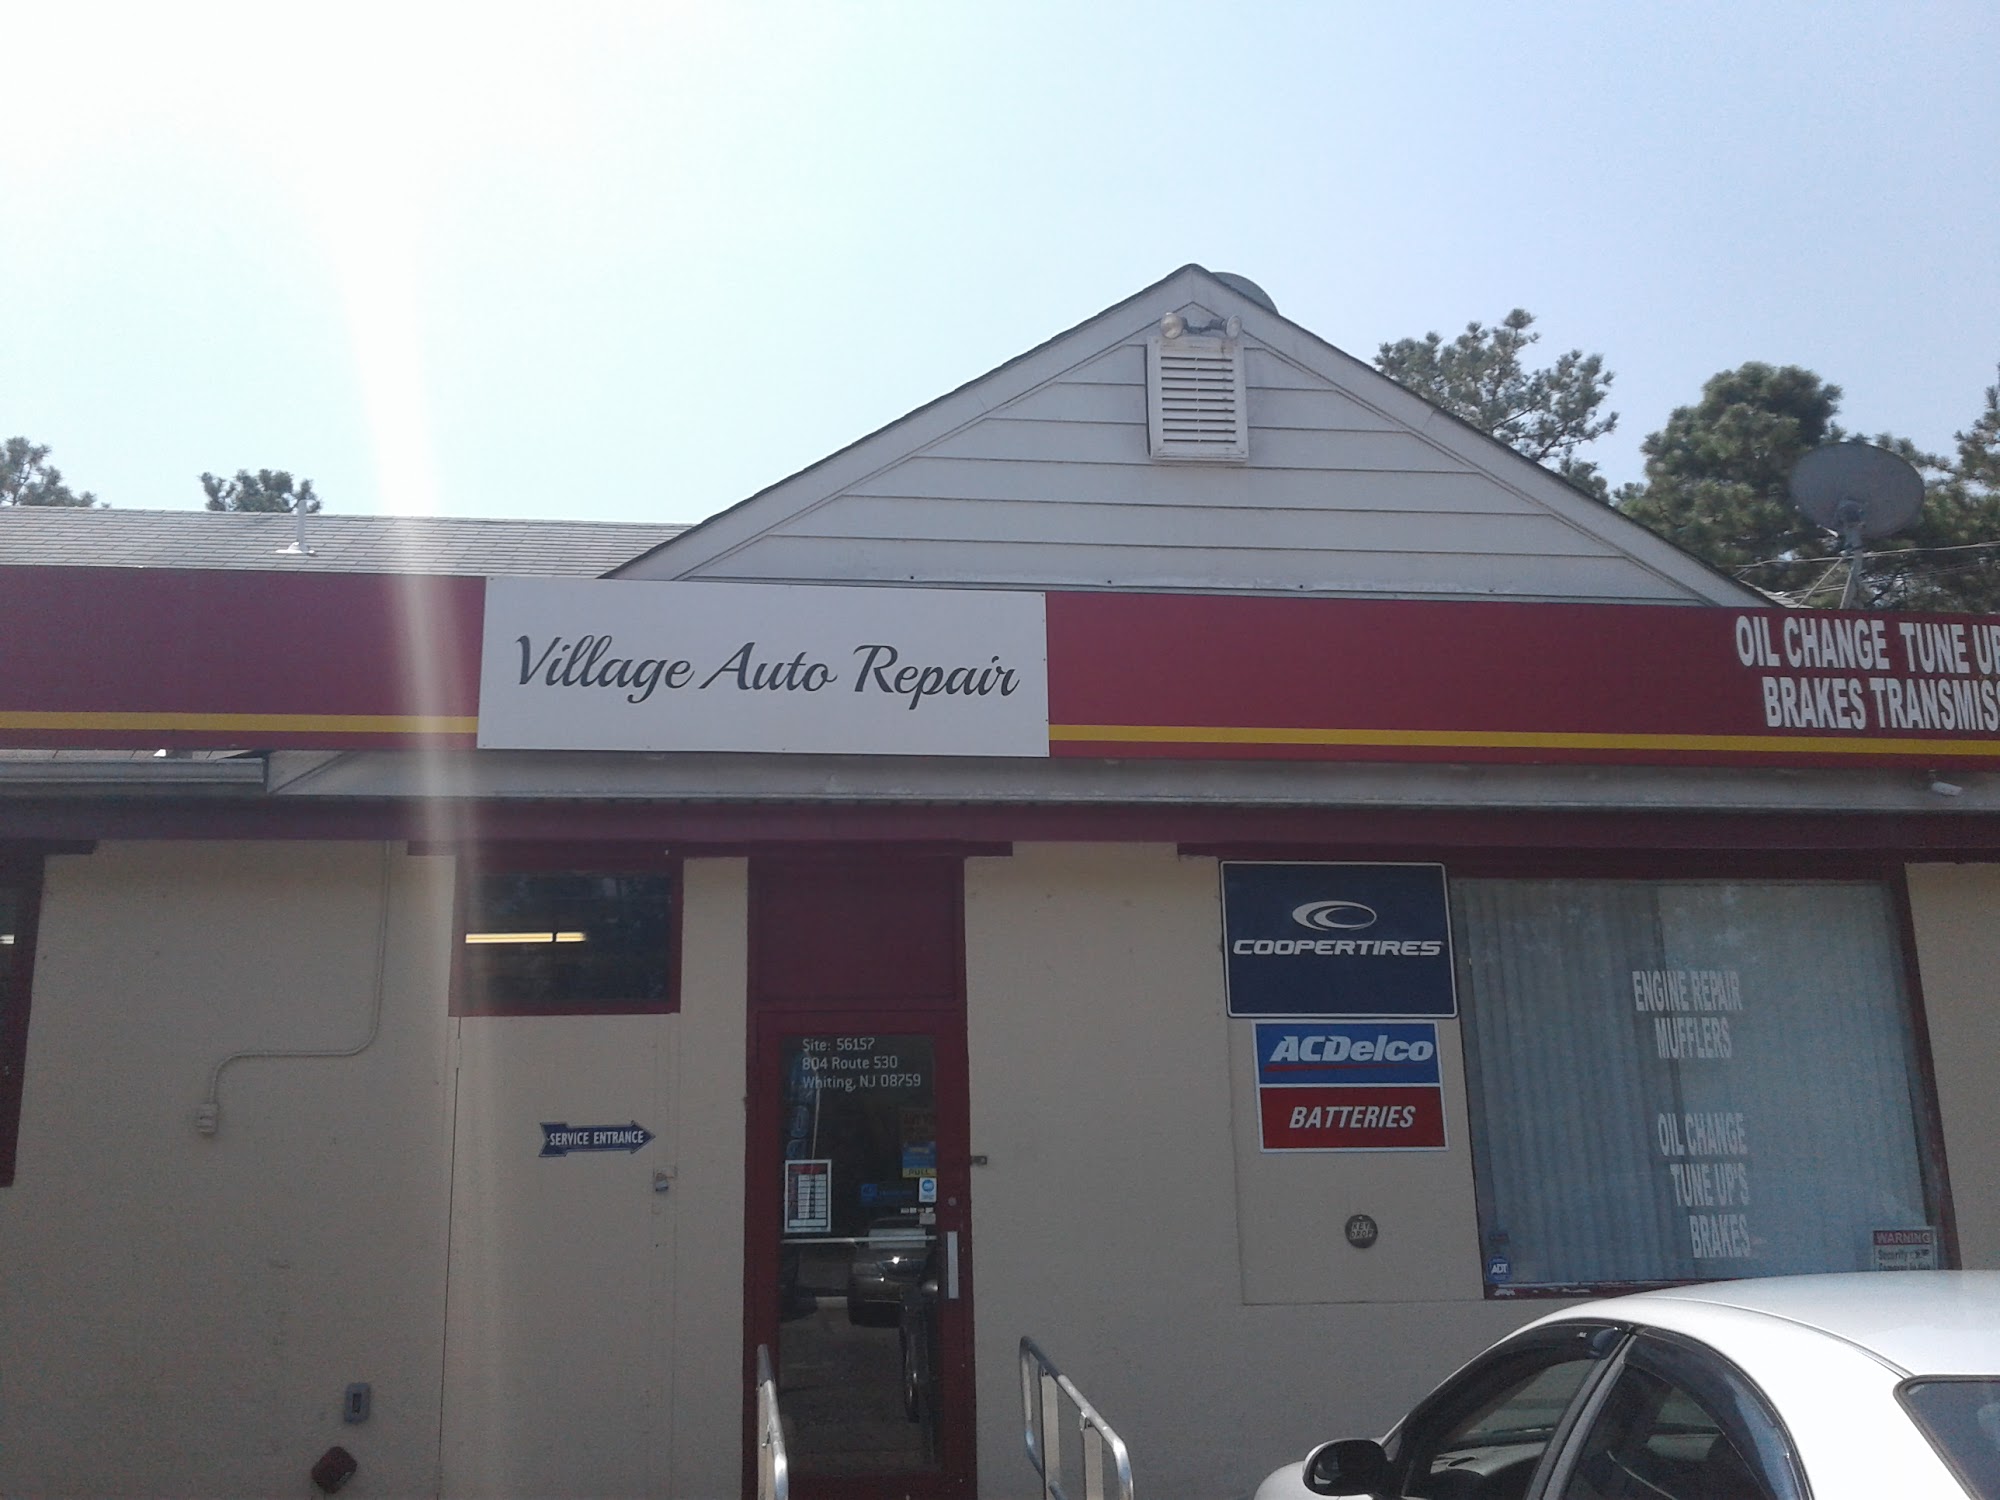 Dave's Village Auto Repair 804 County Rd 530, Whiting New Jersey 08759